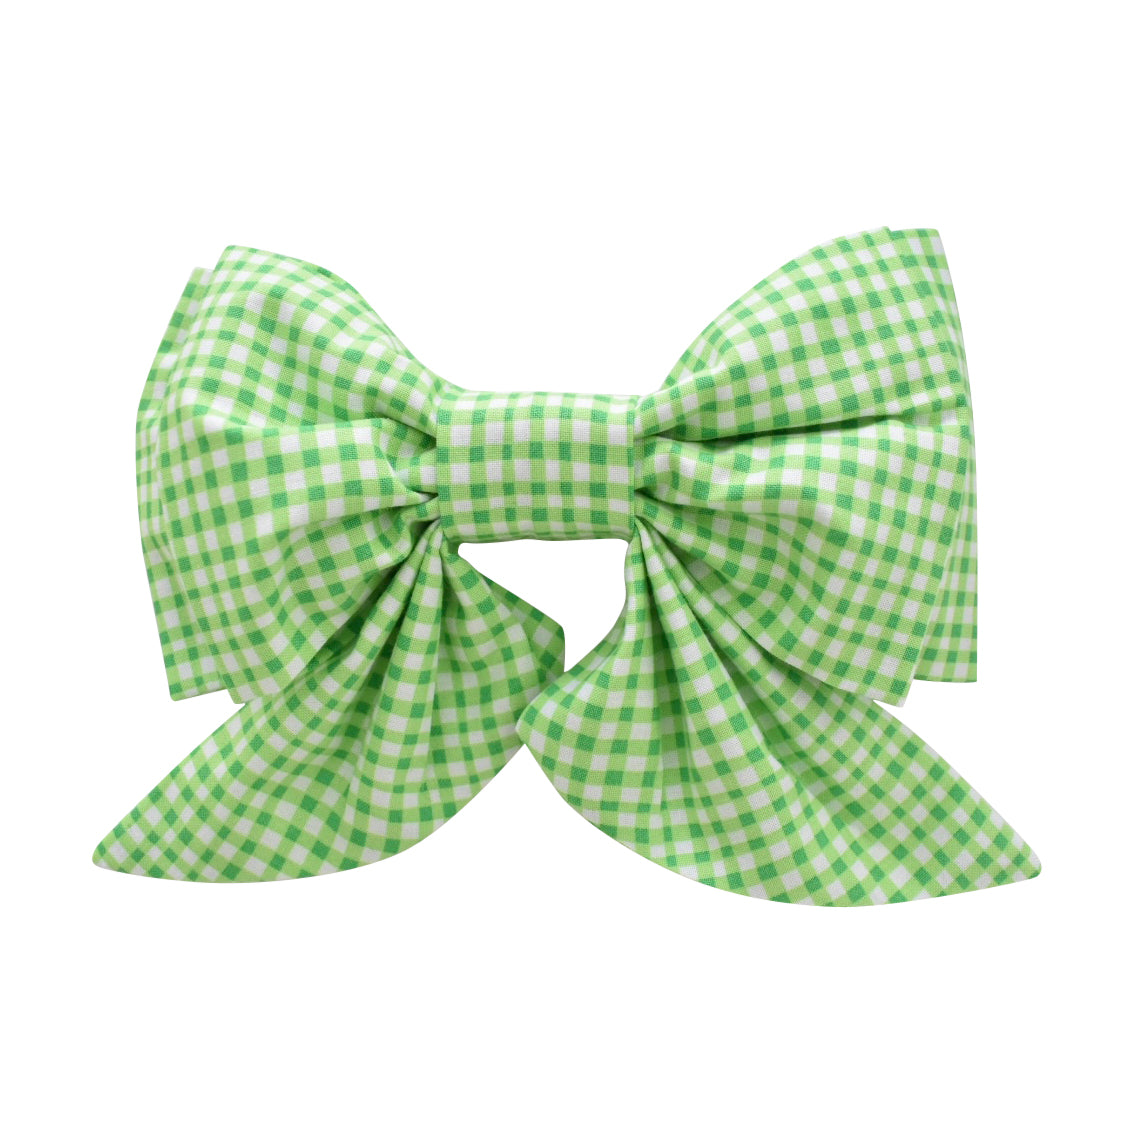 Preppy Bow in Lime Gingham